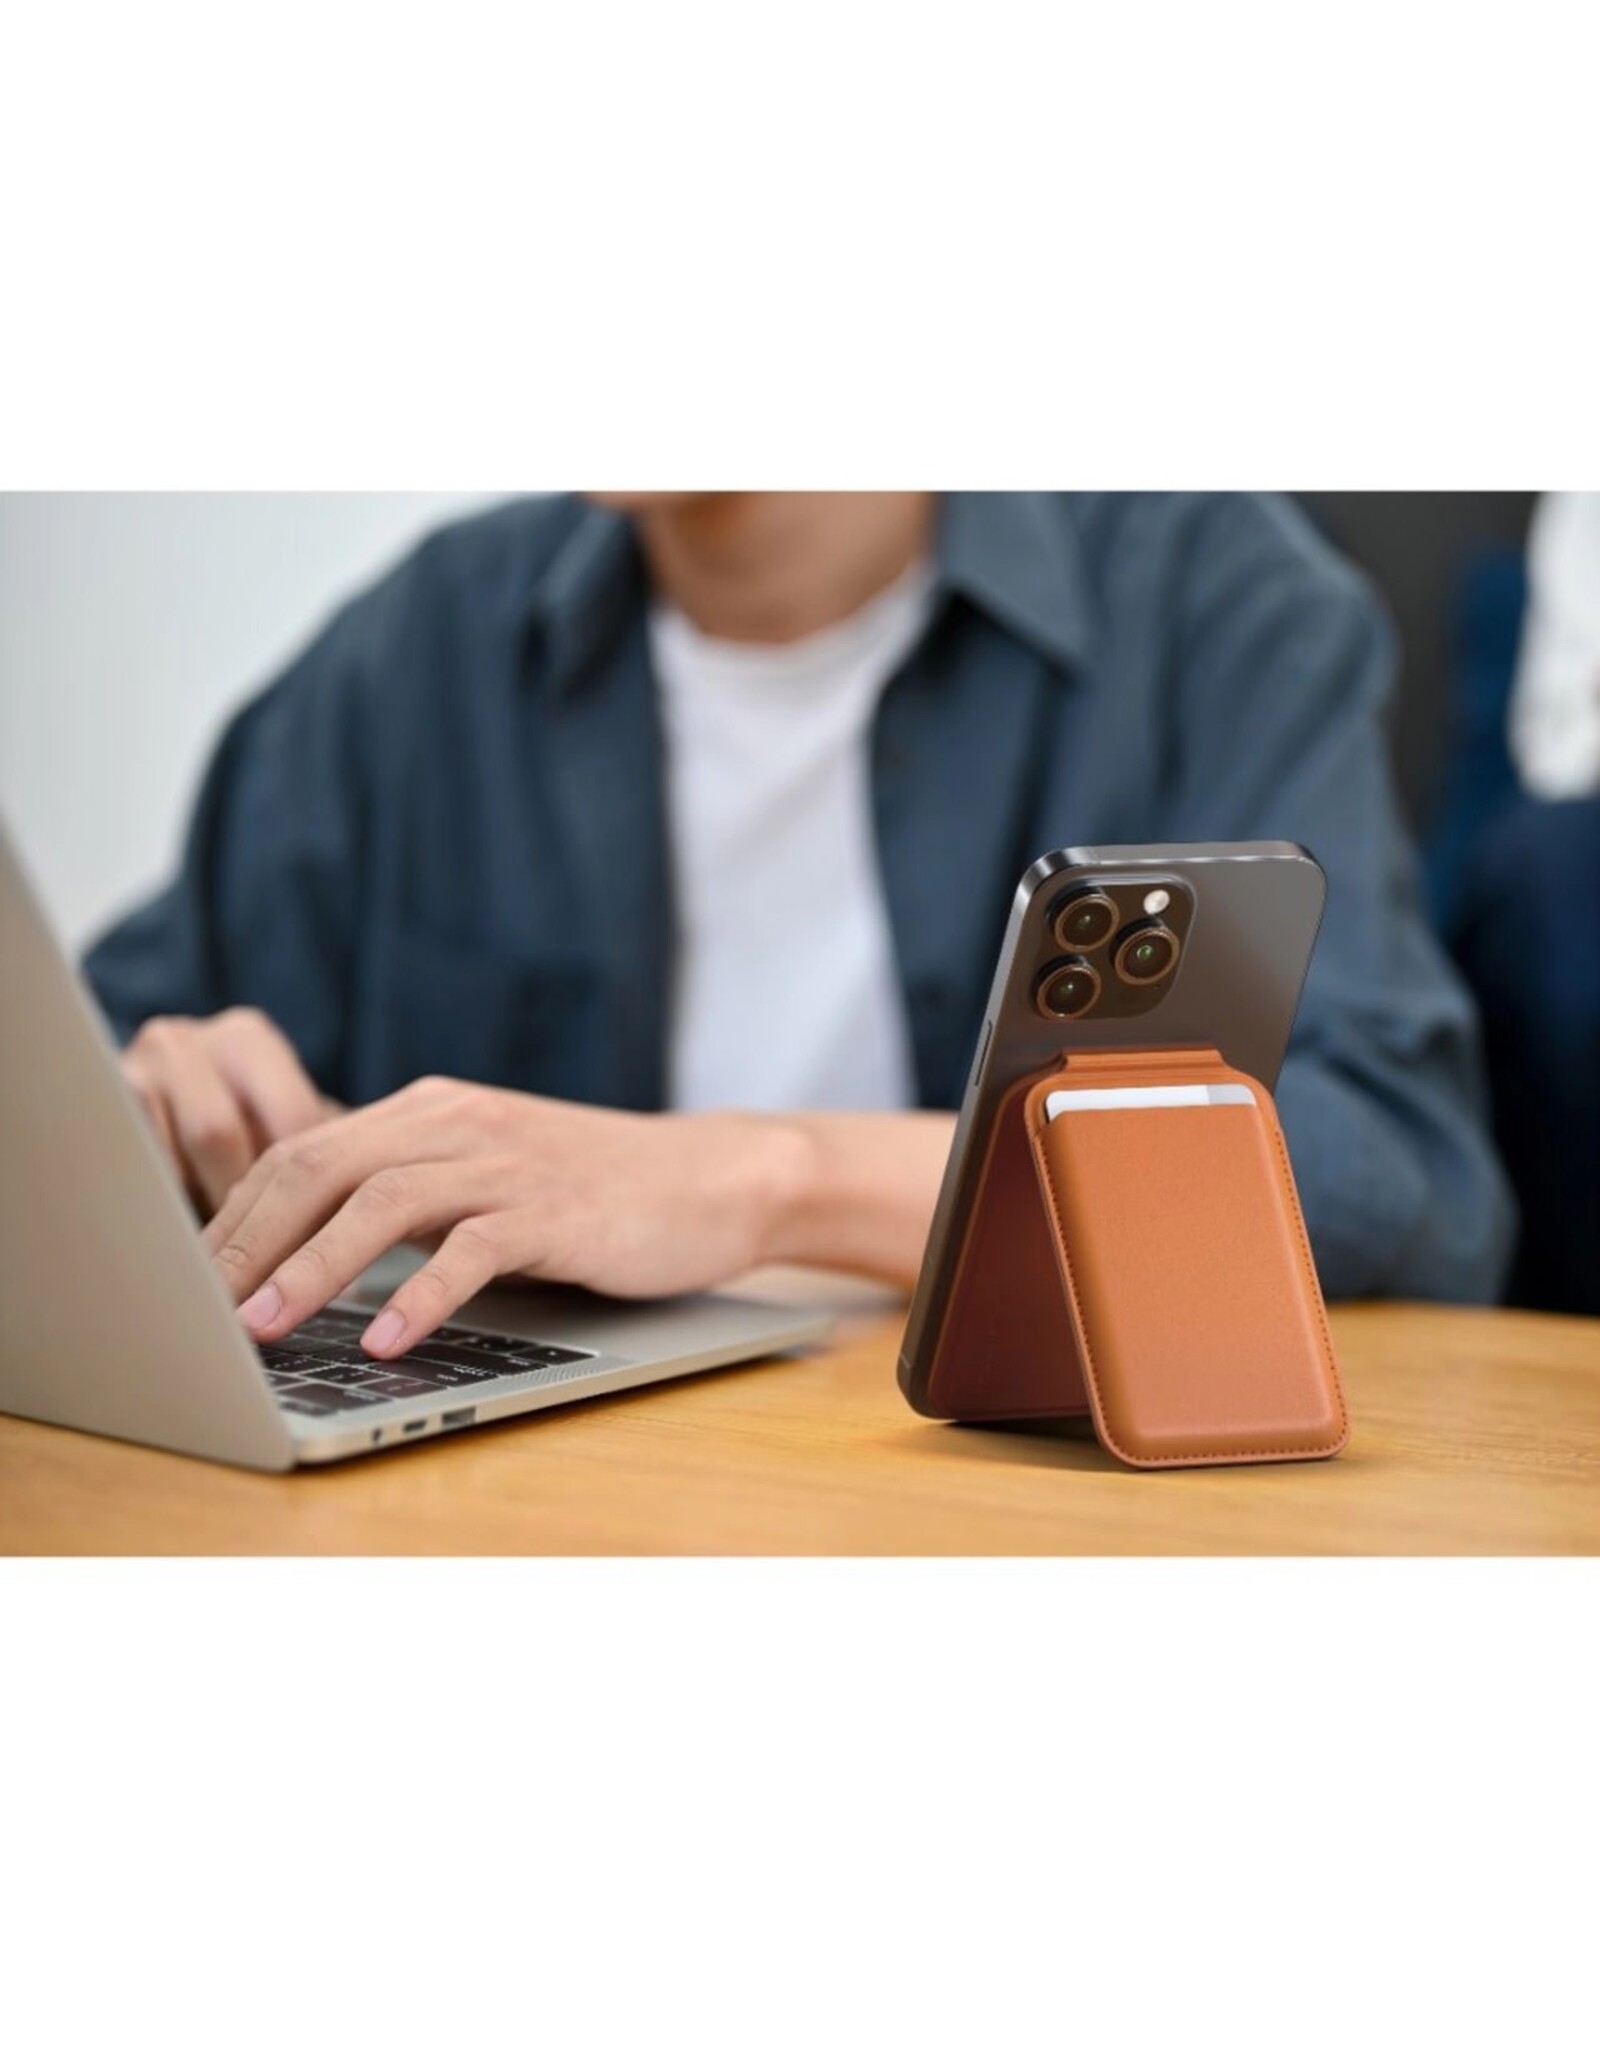 Satechi Satechi Magnetic Wallet Stand For iPhone